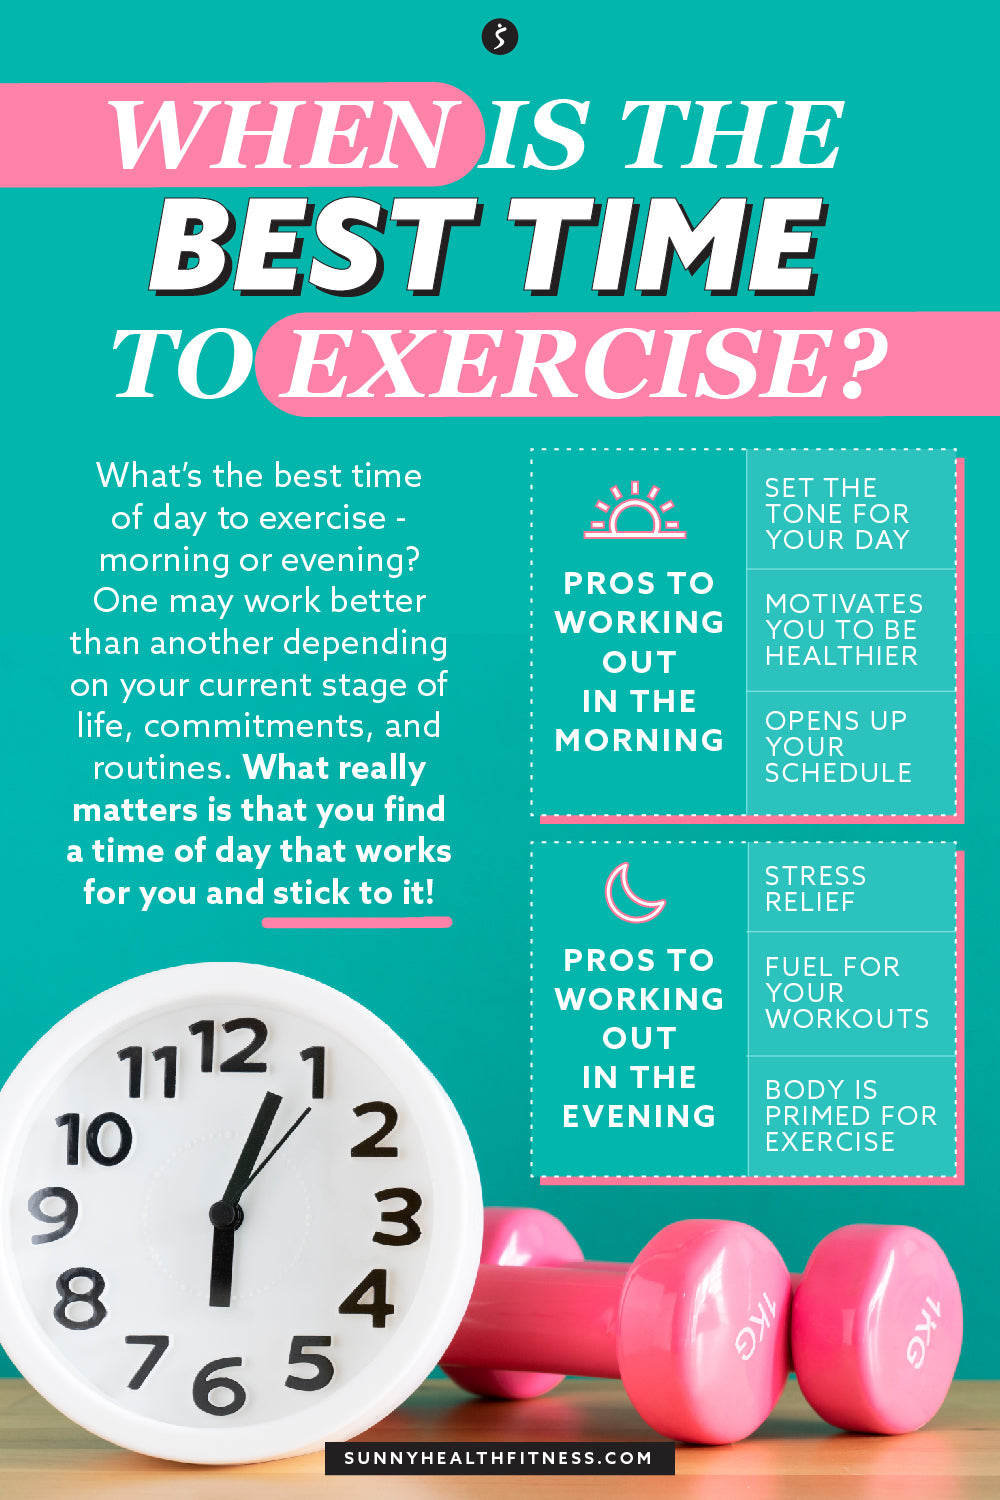 Best time of day to exercise seems to be different for men and women